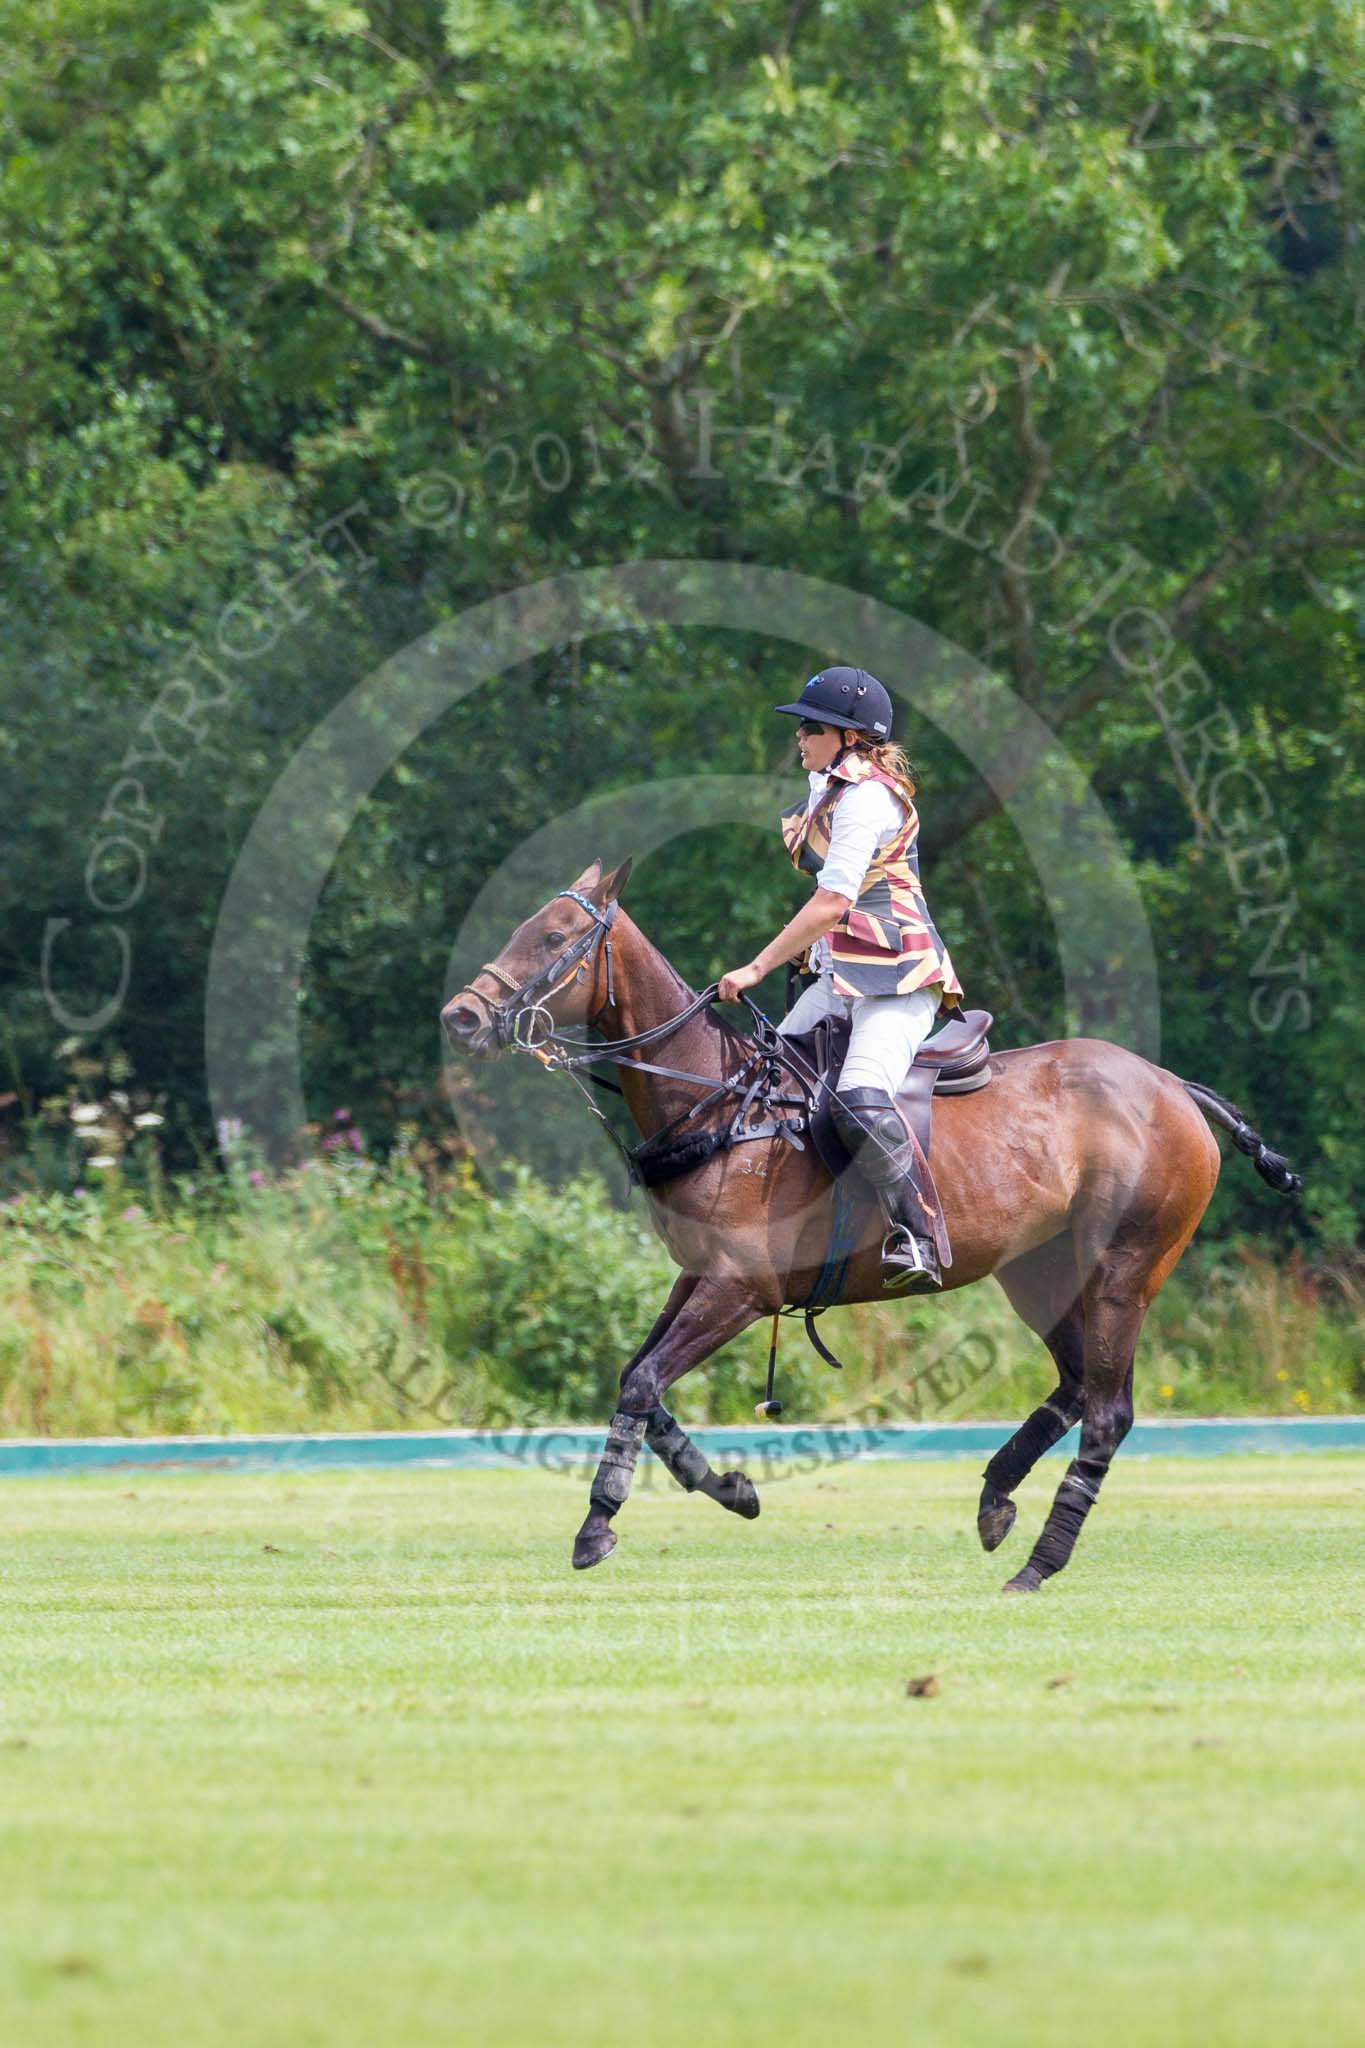 7th Heritage Polo Cup semi-finals: Rosie Ross..
Hurtwood Park Polo Club,
Ewhurst Green,
Surrey,
United Kingdom,
on 04 August 2012 at 14:43, image #223